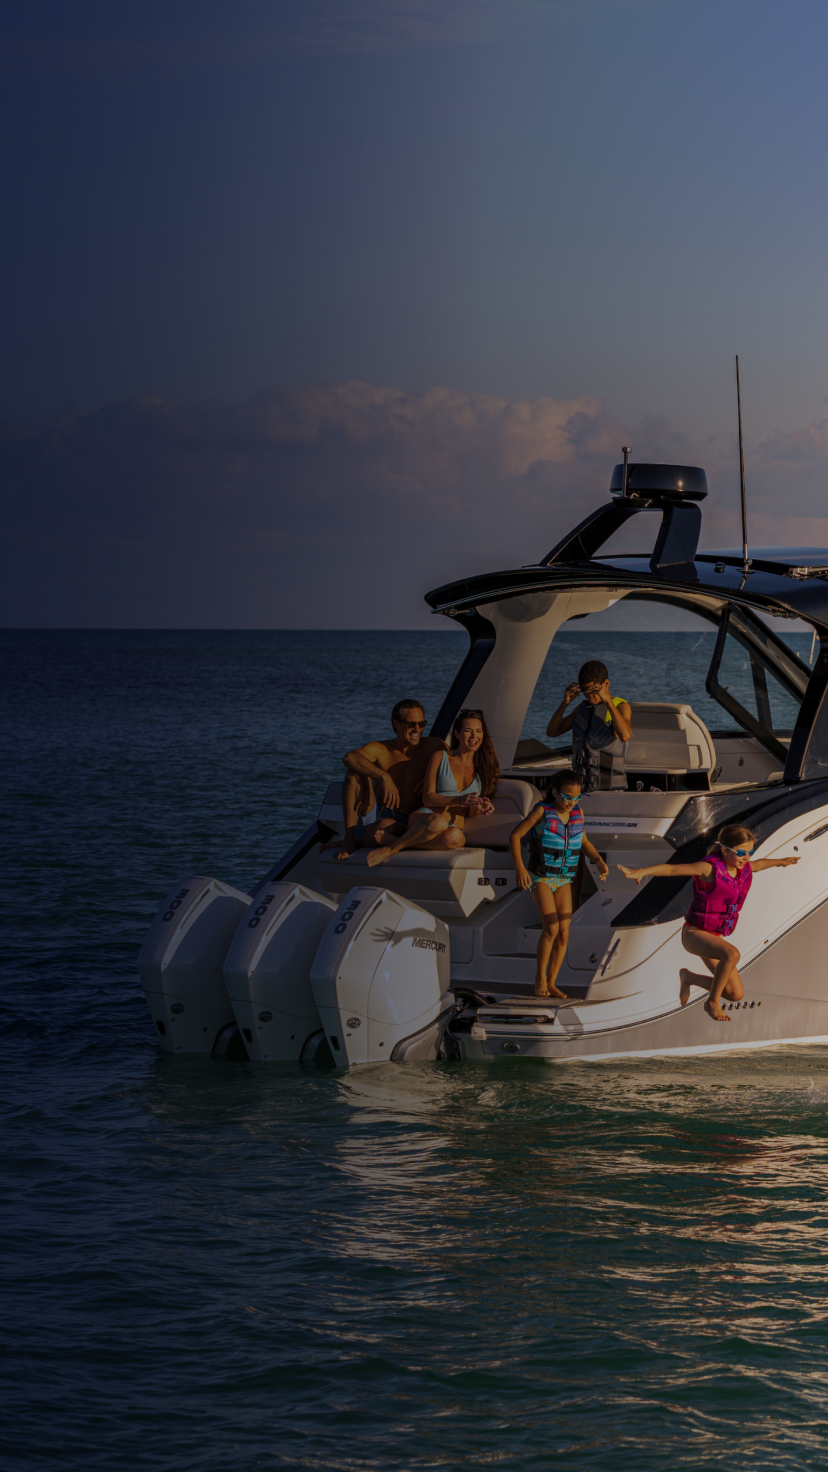 Family spending time on marine vehicle in the ocean.